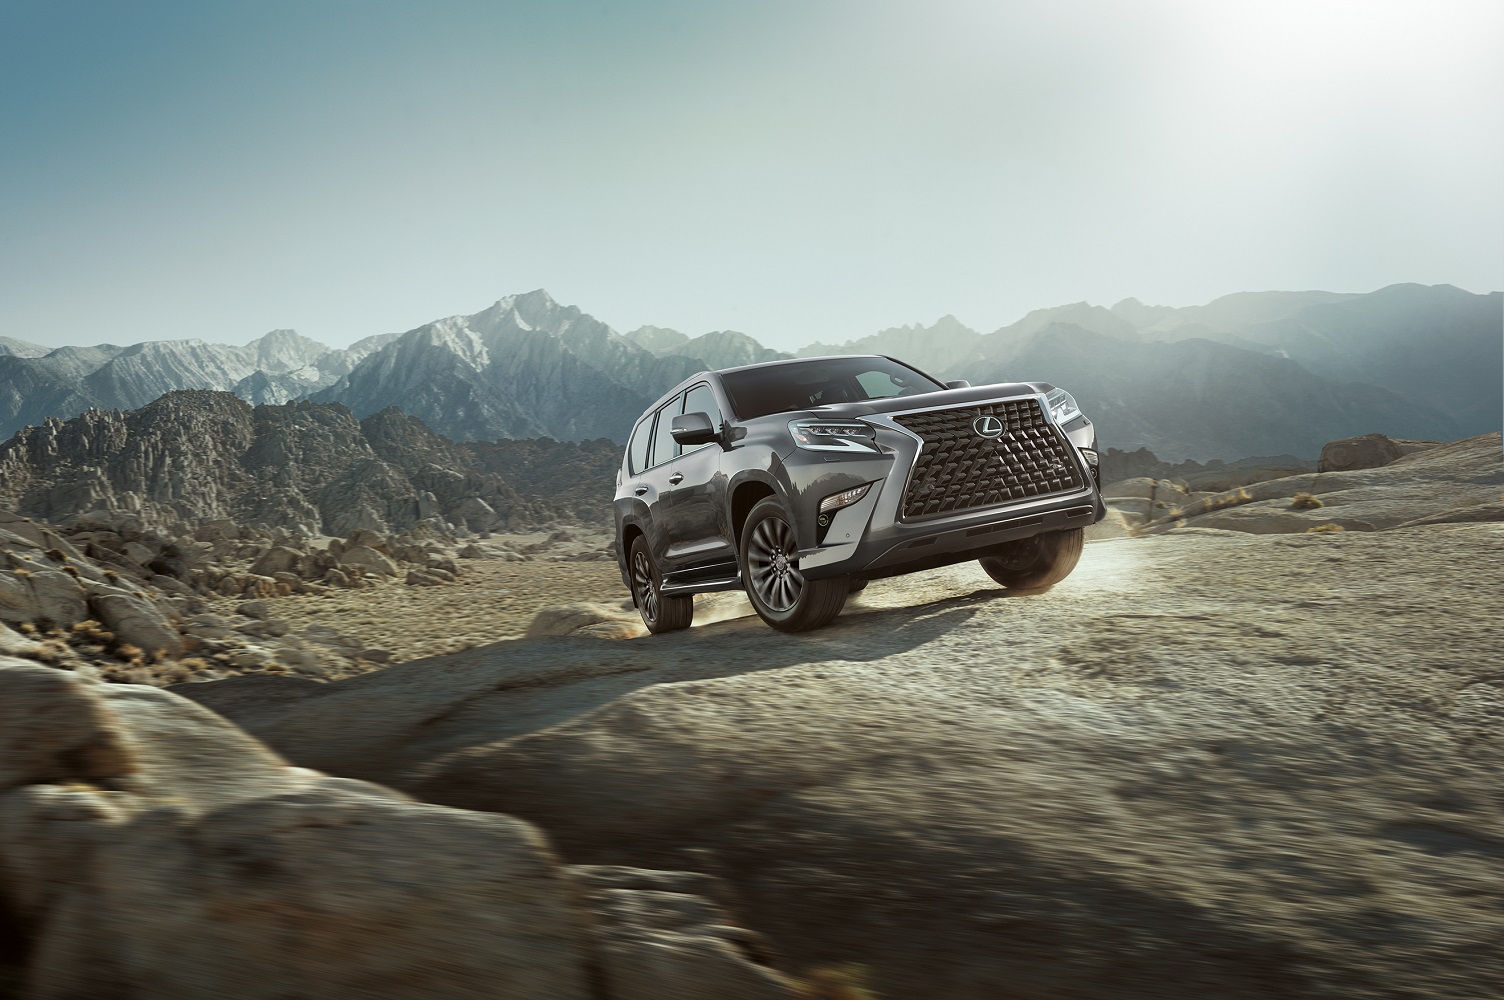 2020 lexus gx 460 gets more on and off road tech features gxg 0076 23261befb359bf3f8f22b2c31b73b3949aa55722